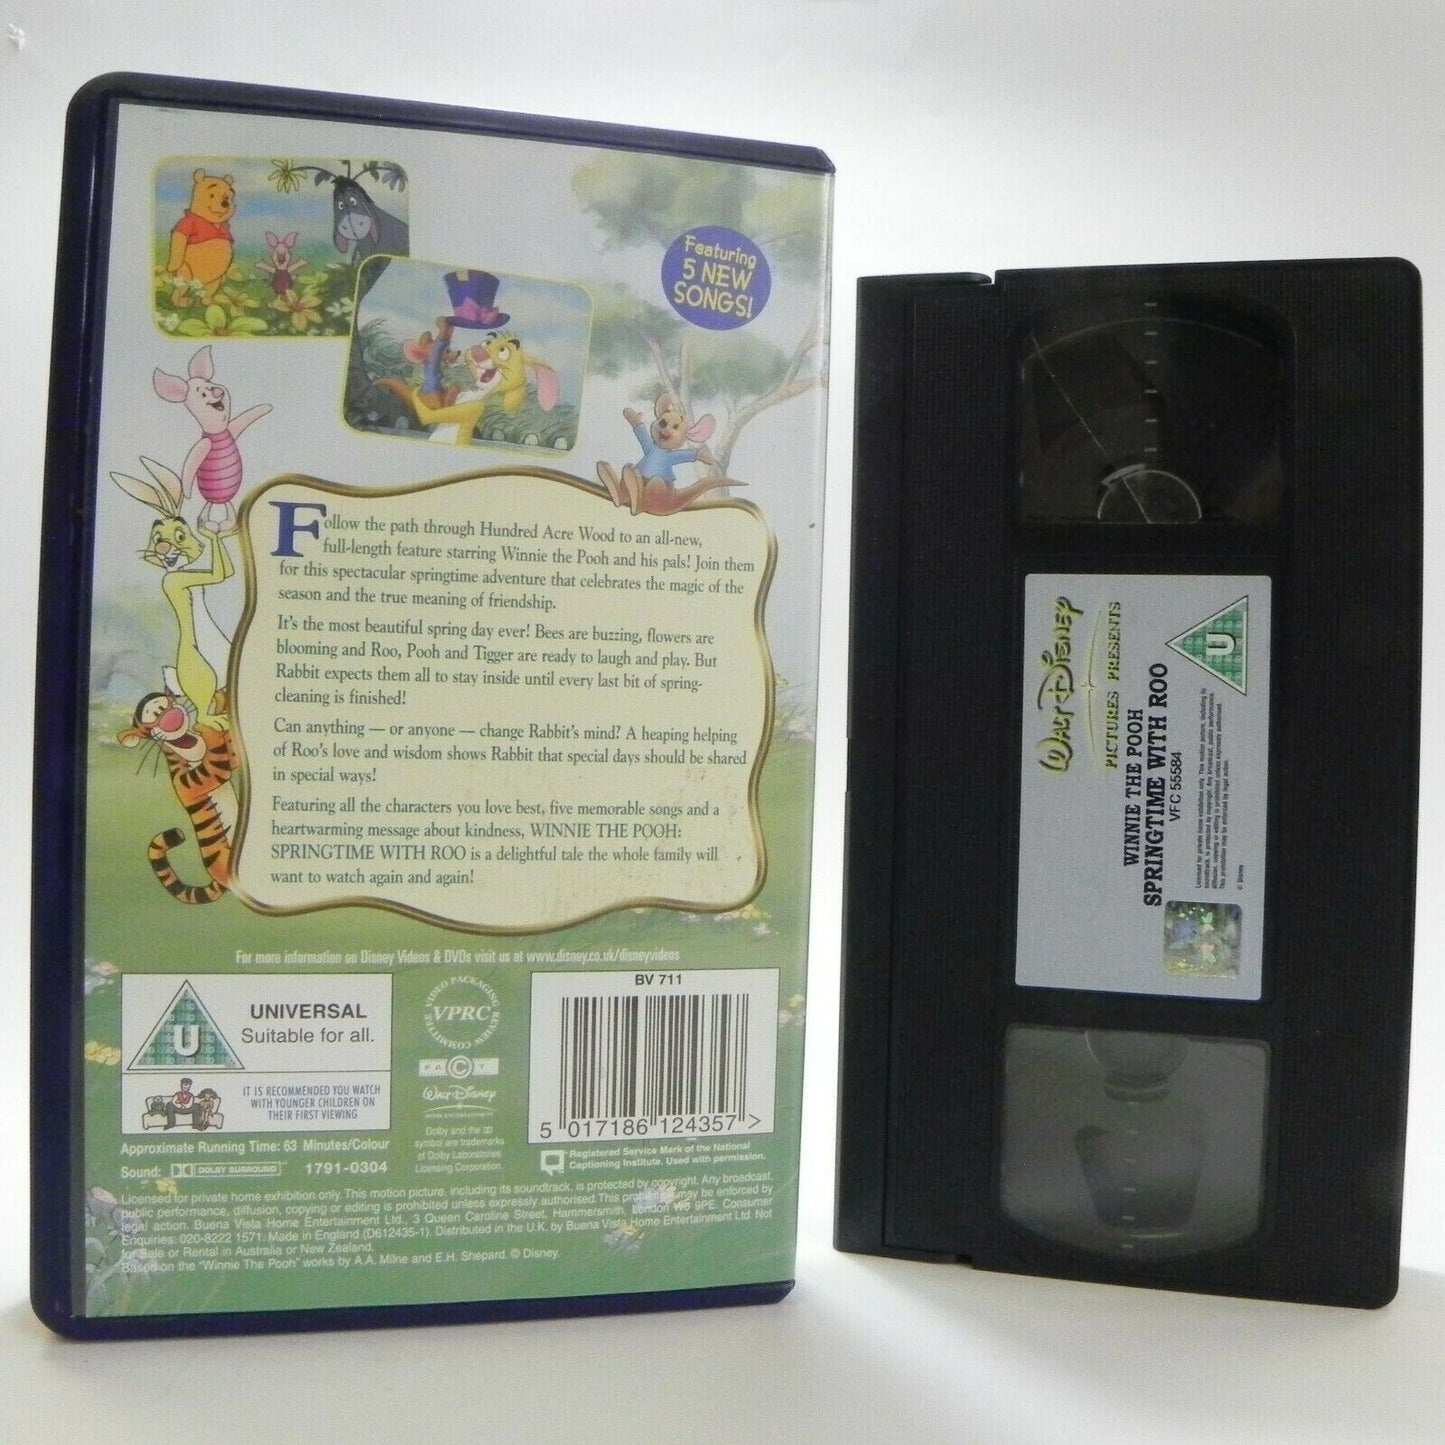 Winnie The Pooh: Winnie The Pooh: Springtime With Roo - Animated - Kids - VHS-